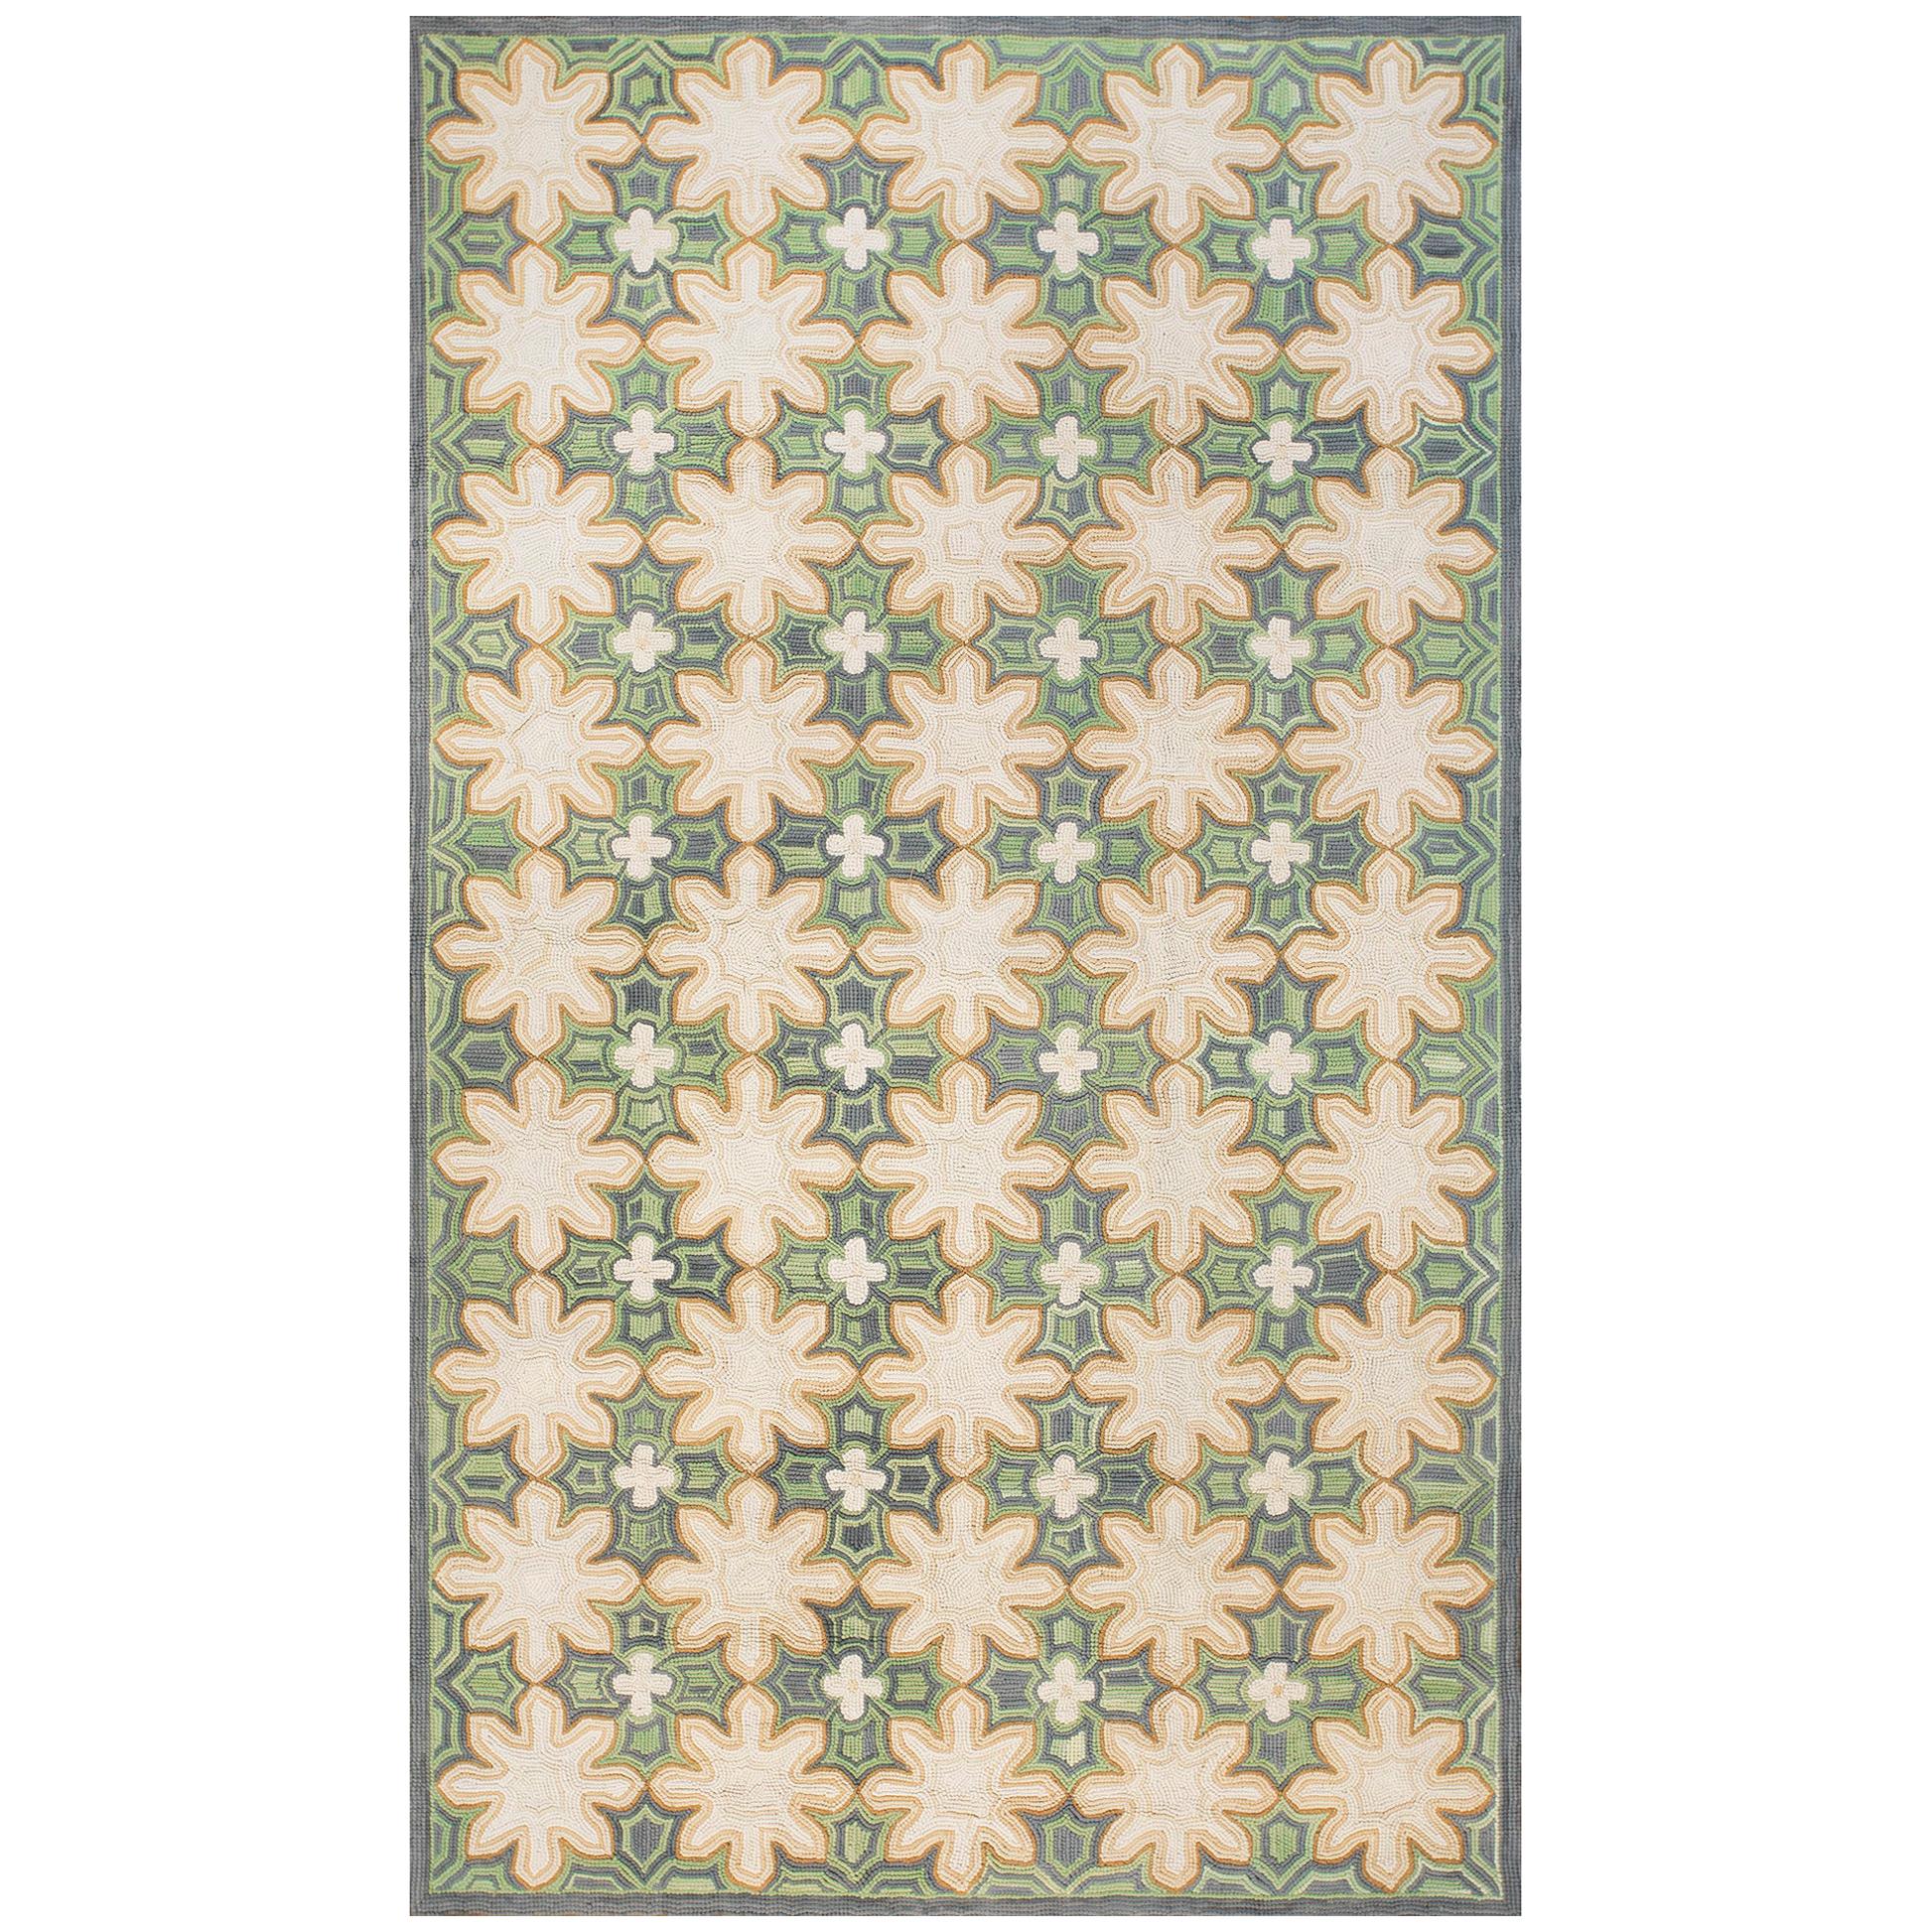 Contemporary Handmade Cotton Hooked Rug  ( 6' x 9' - 183 x 275 cm ) For Sale